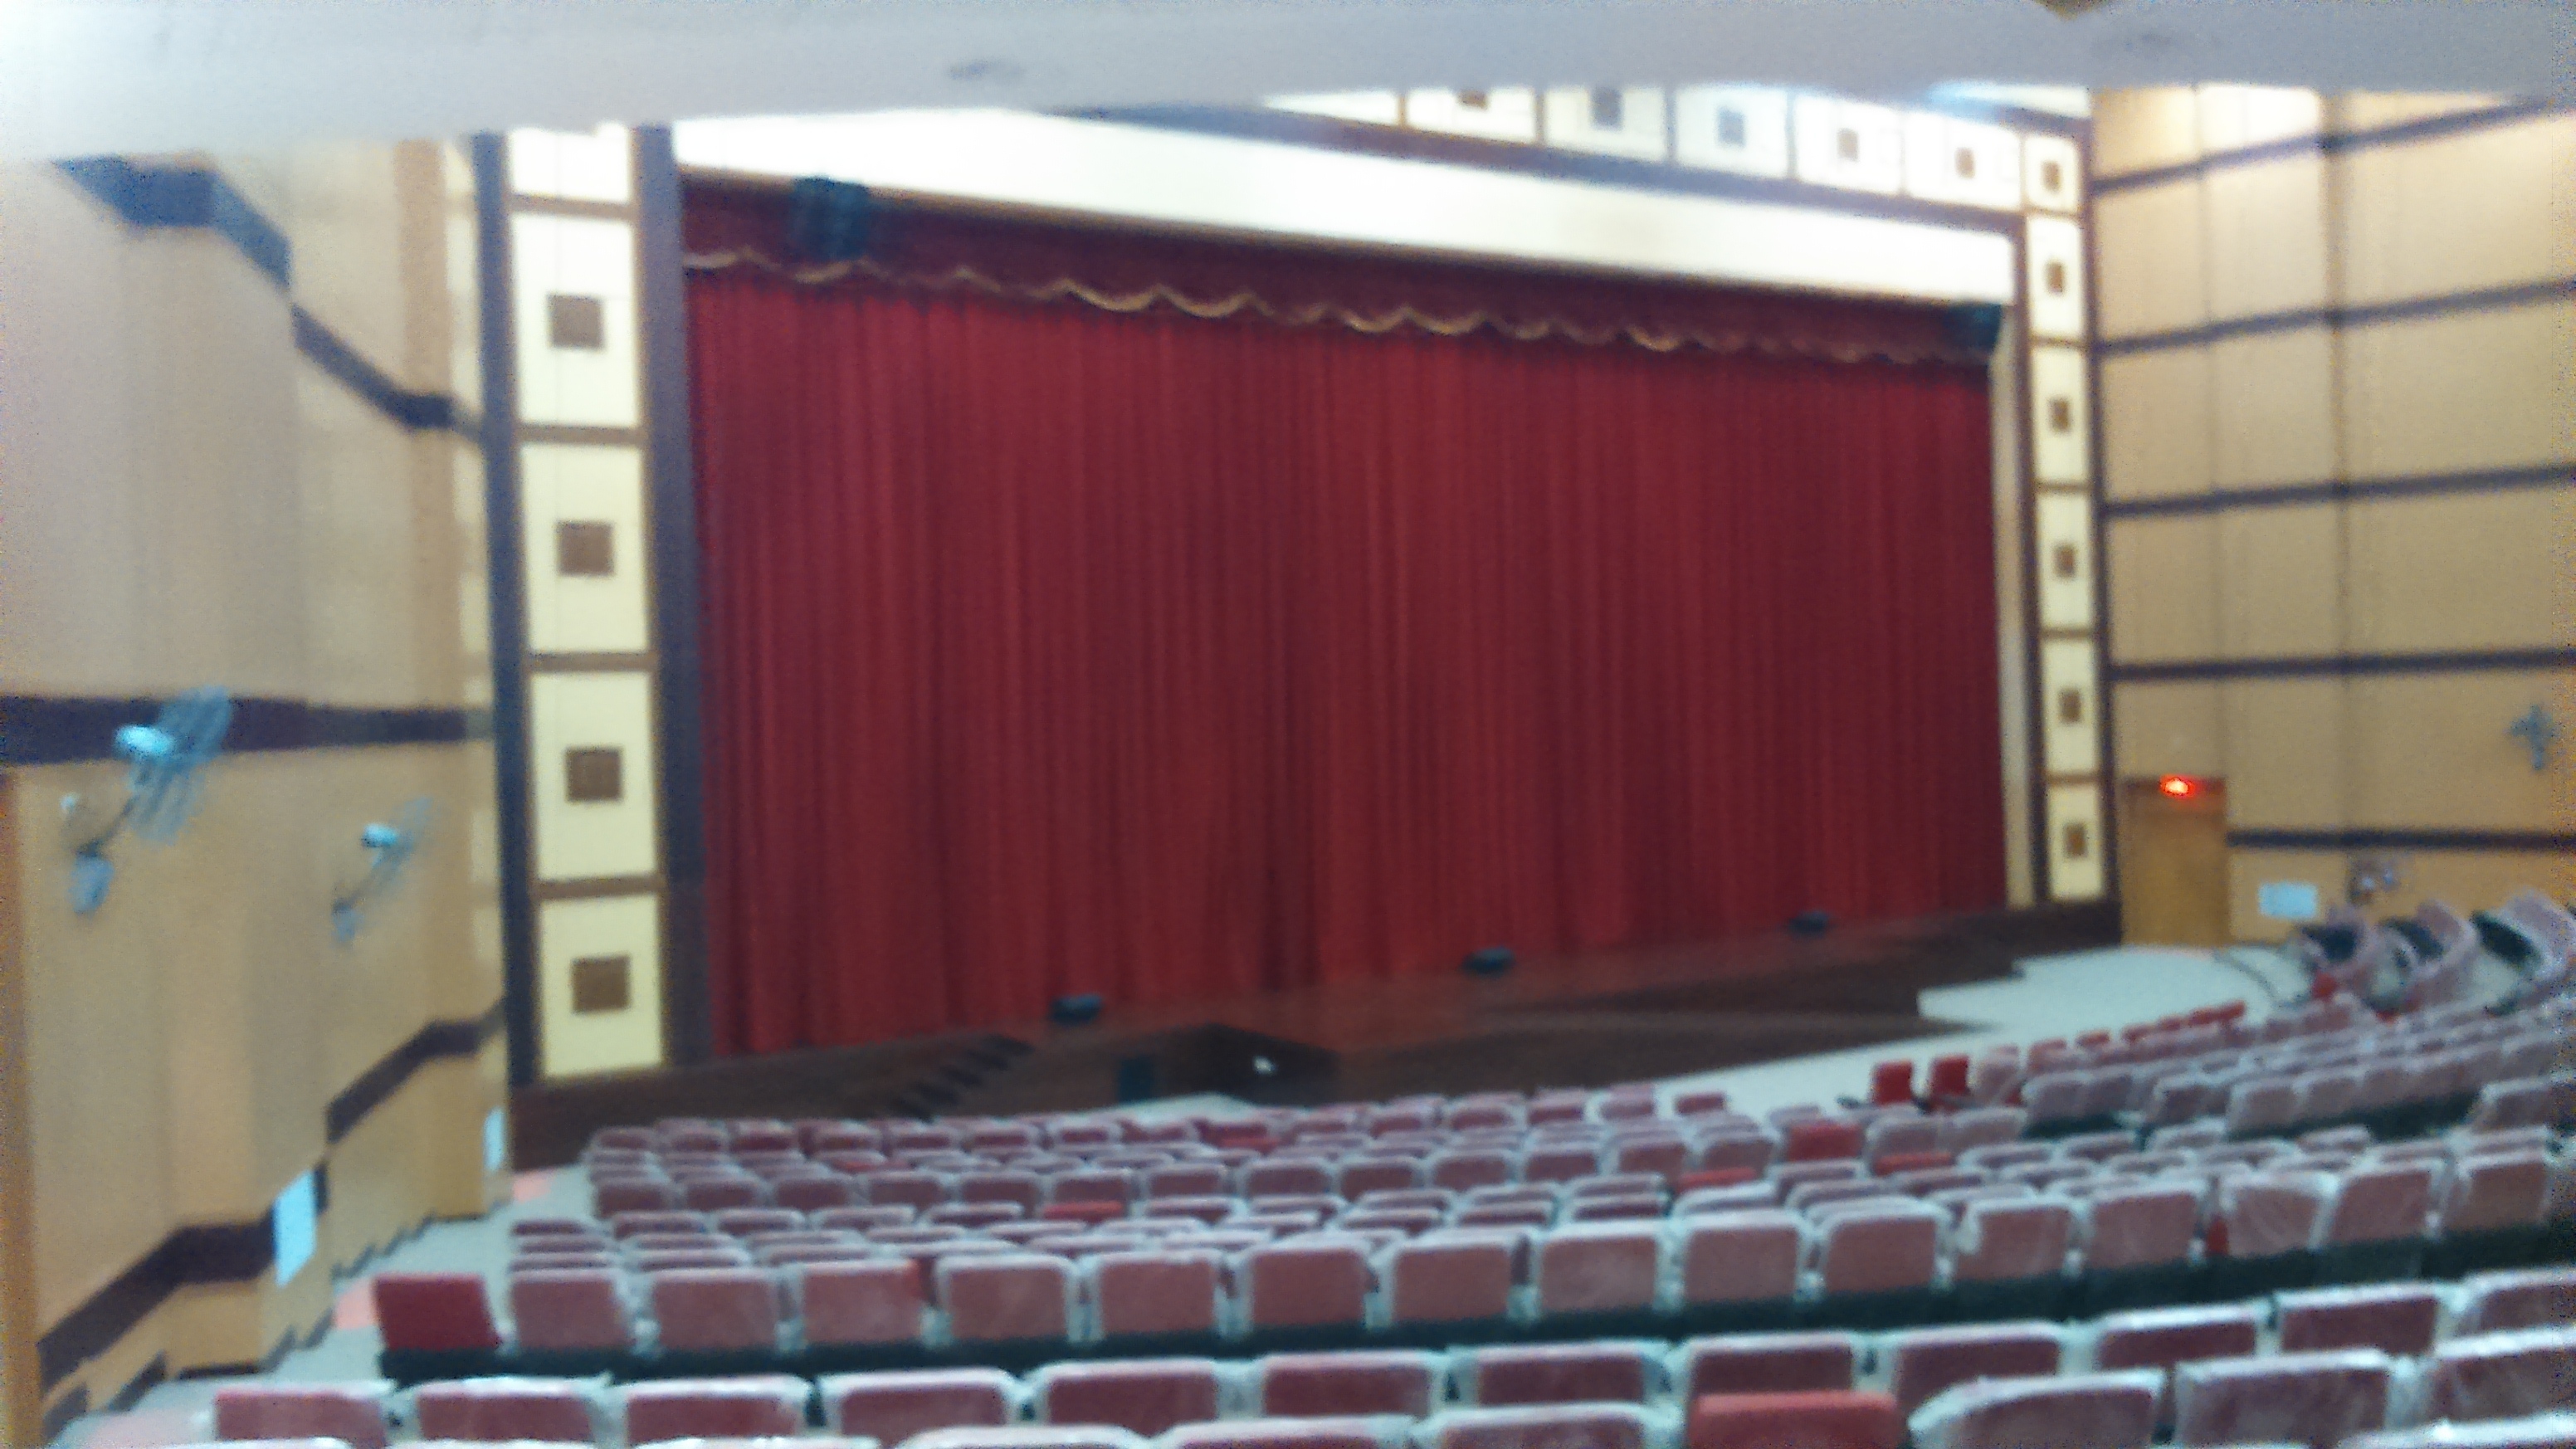 Automatic Motorized Stage Curtain